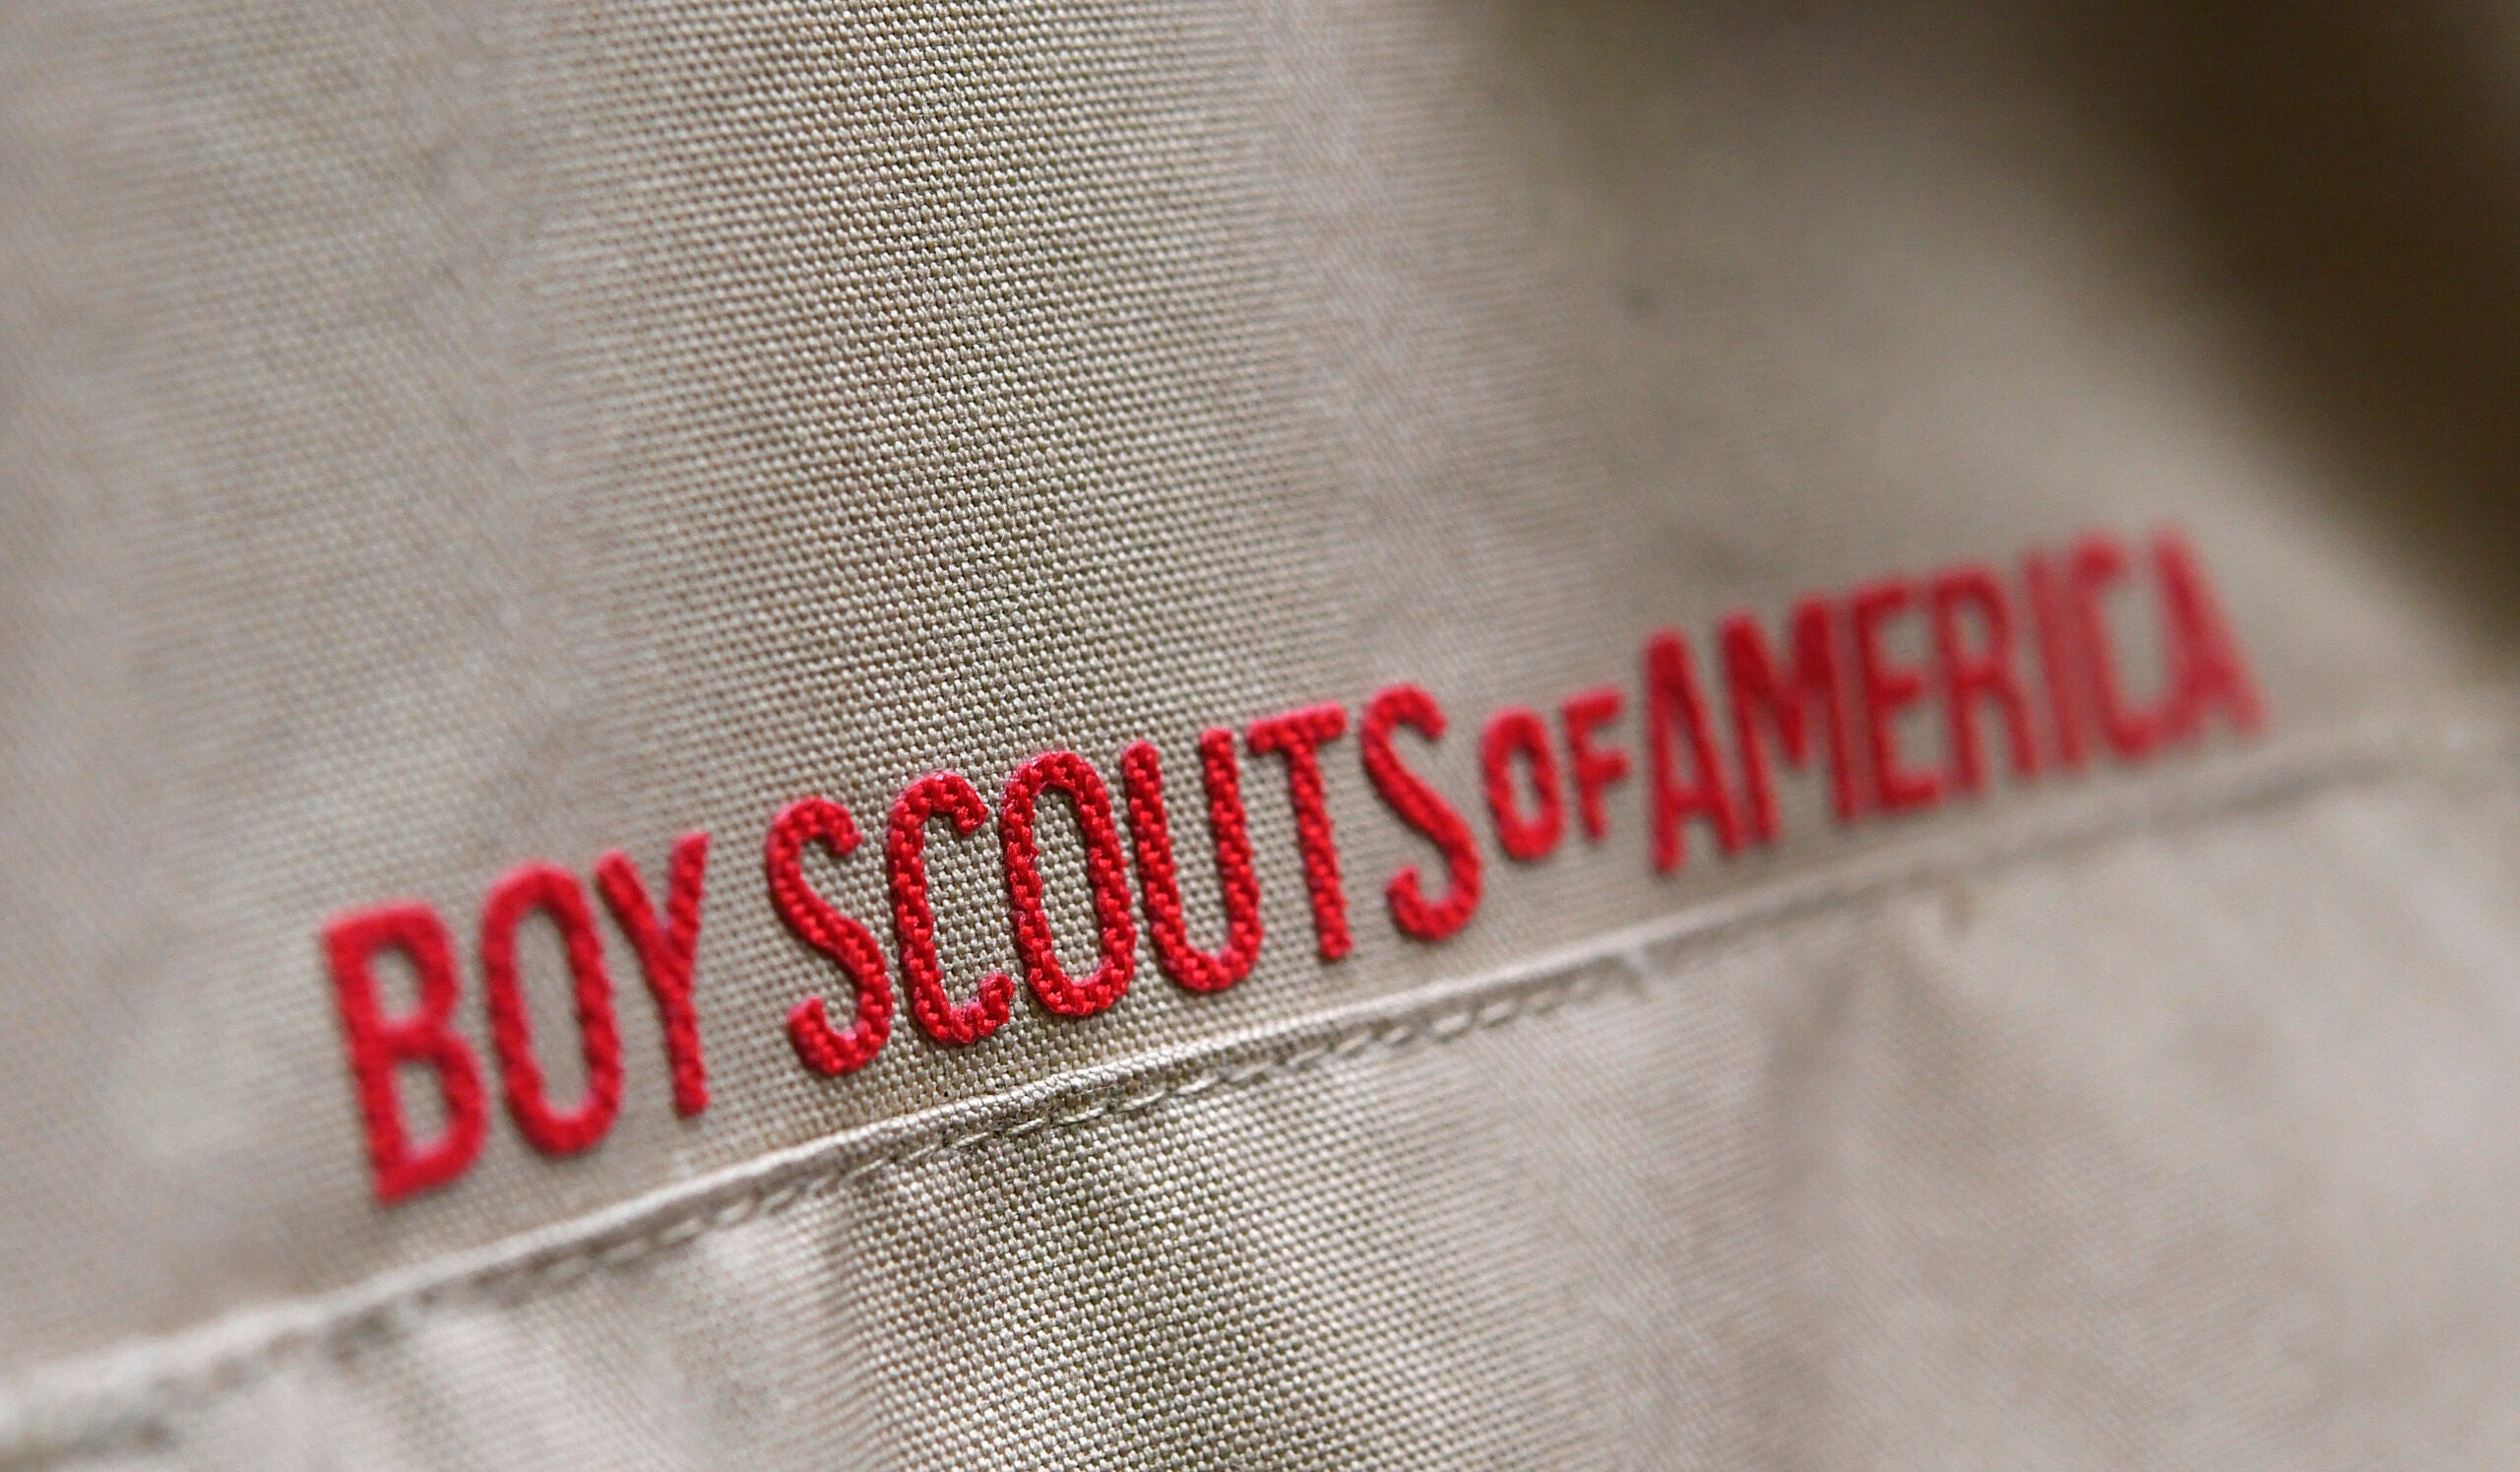 Boy Scouts forever